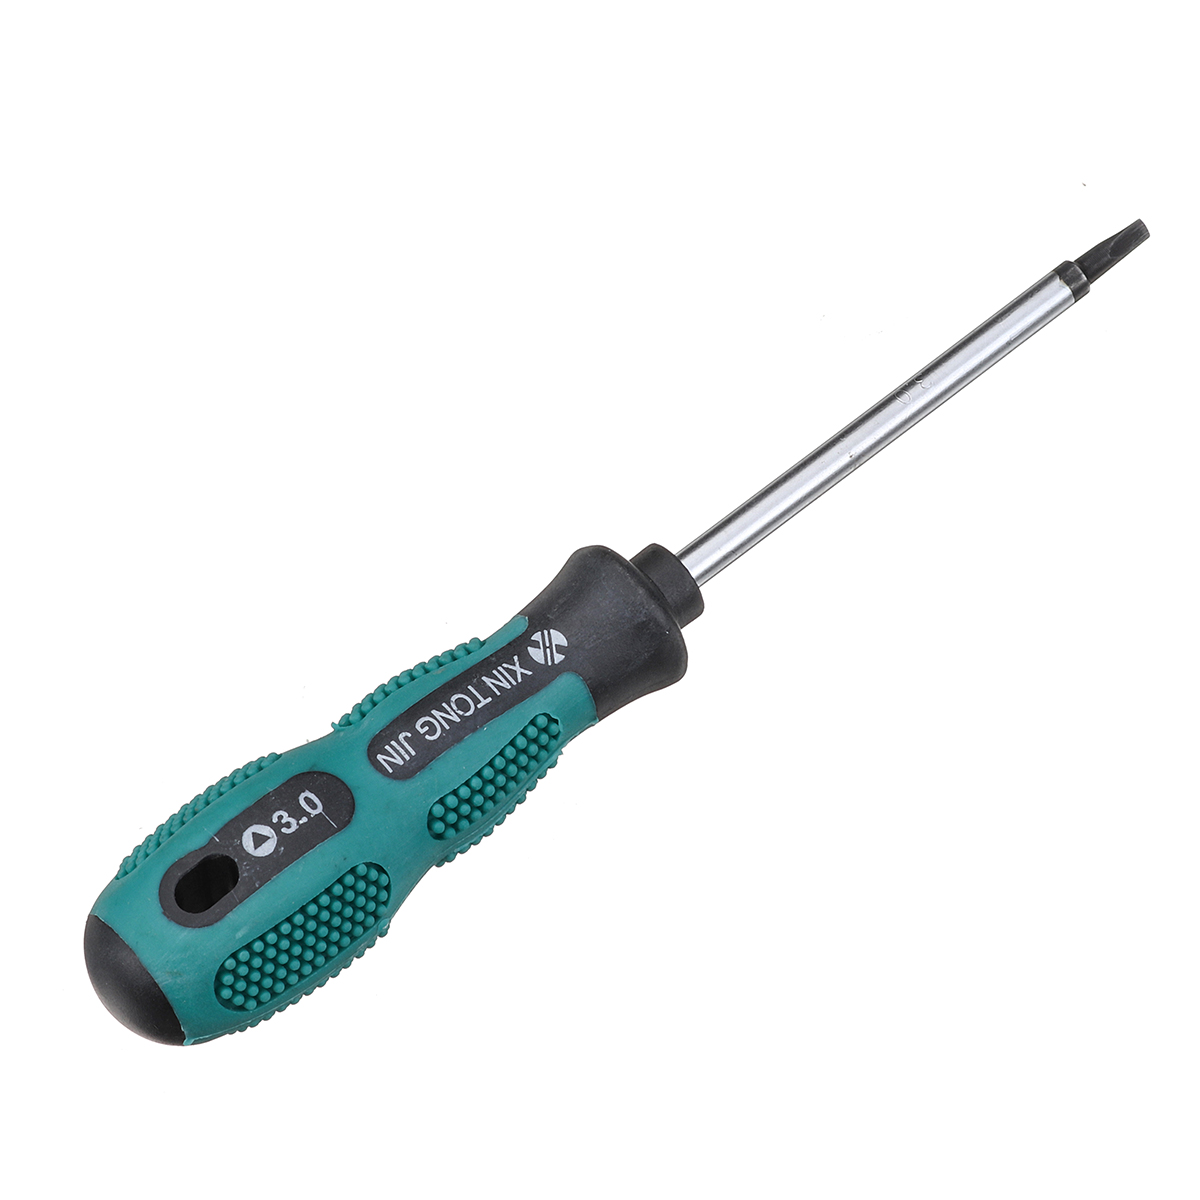 Portable-Insulated-Screwdriver-Magnetic-Bits-Watches-Toys-Repair-Tool-1553444-7